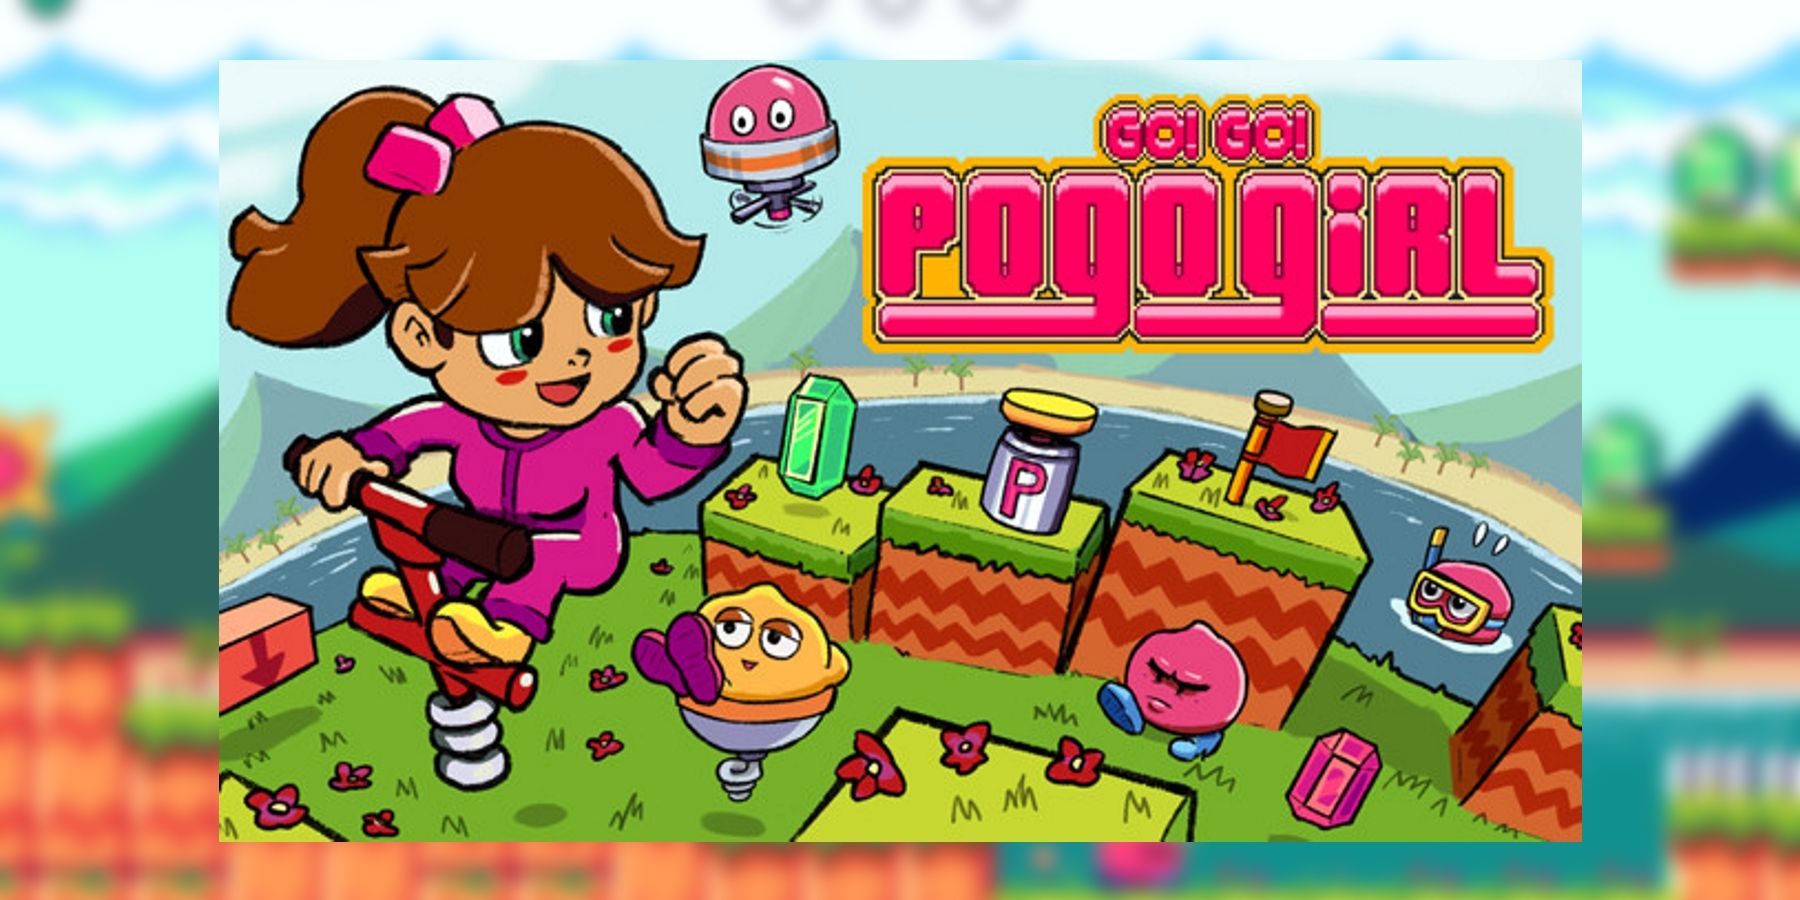 pogogirl feature 1 image